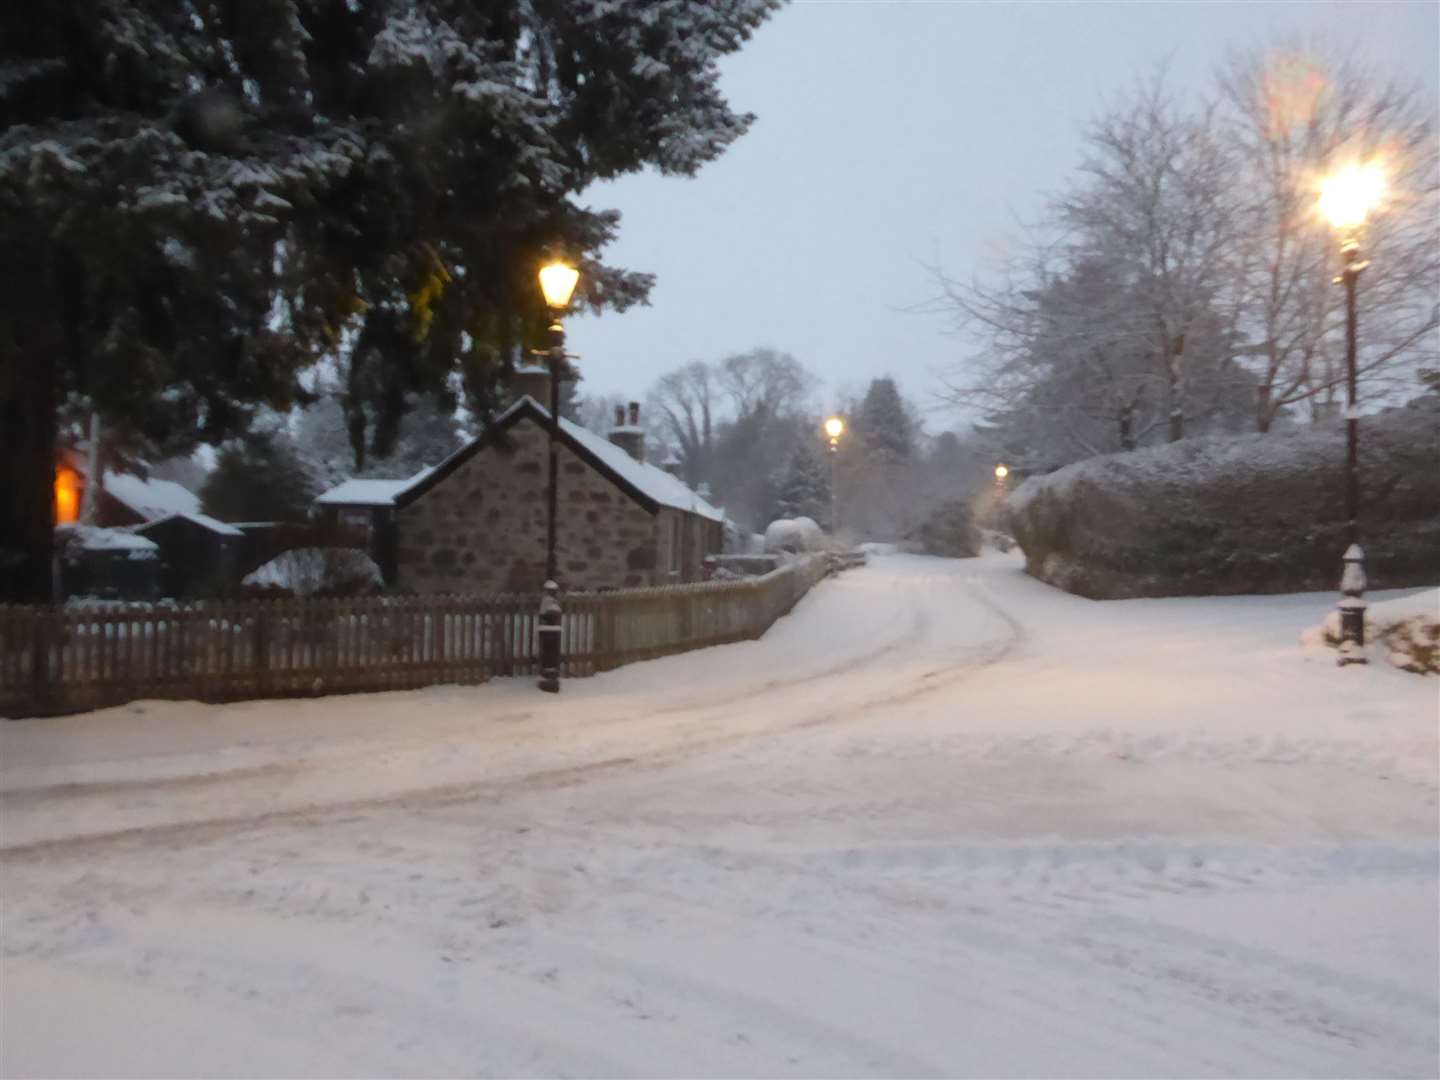 Early morning in Cawdor village by Jean Ford.